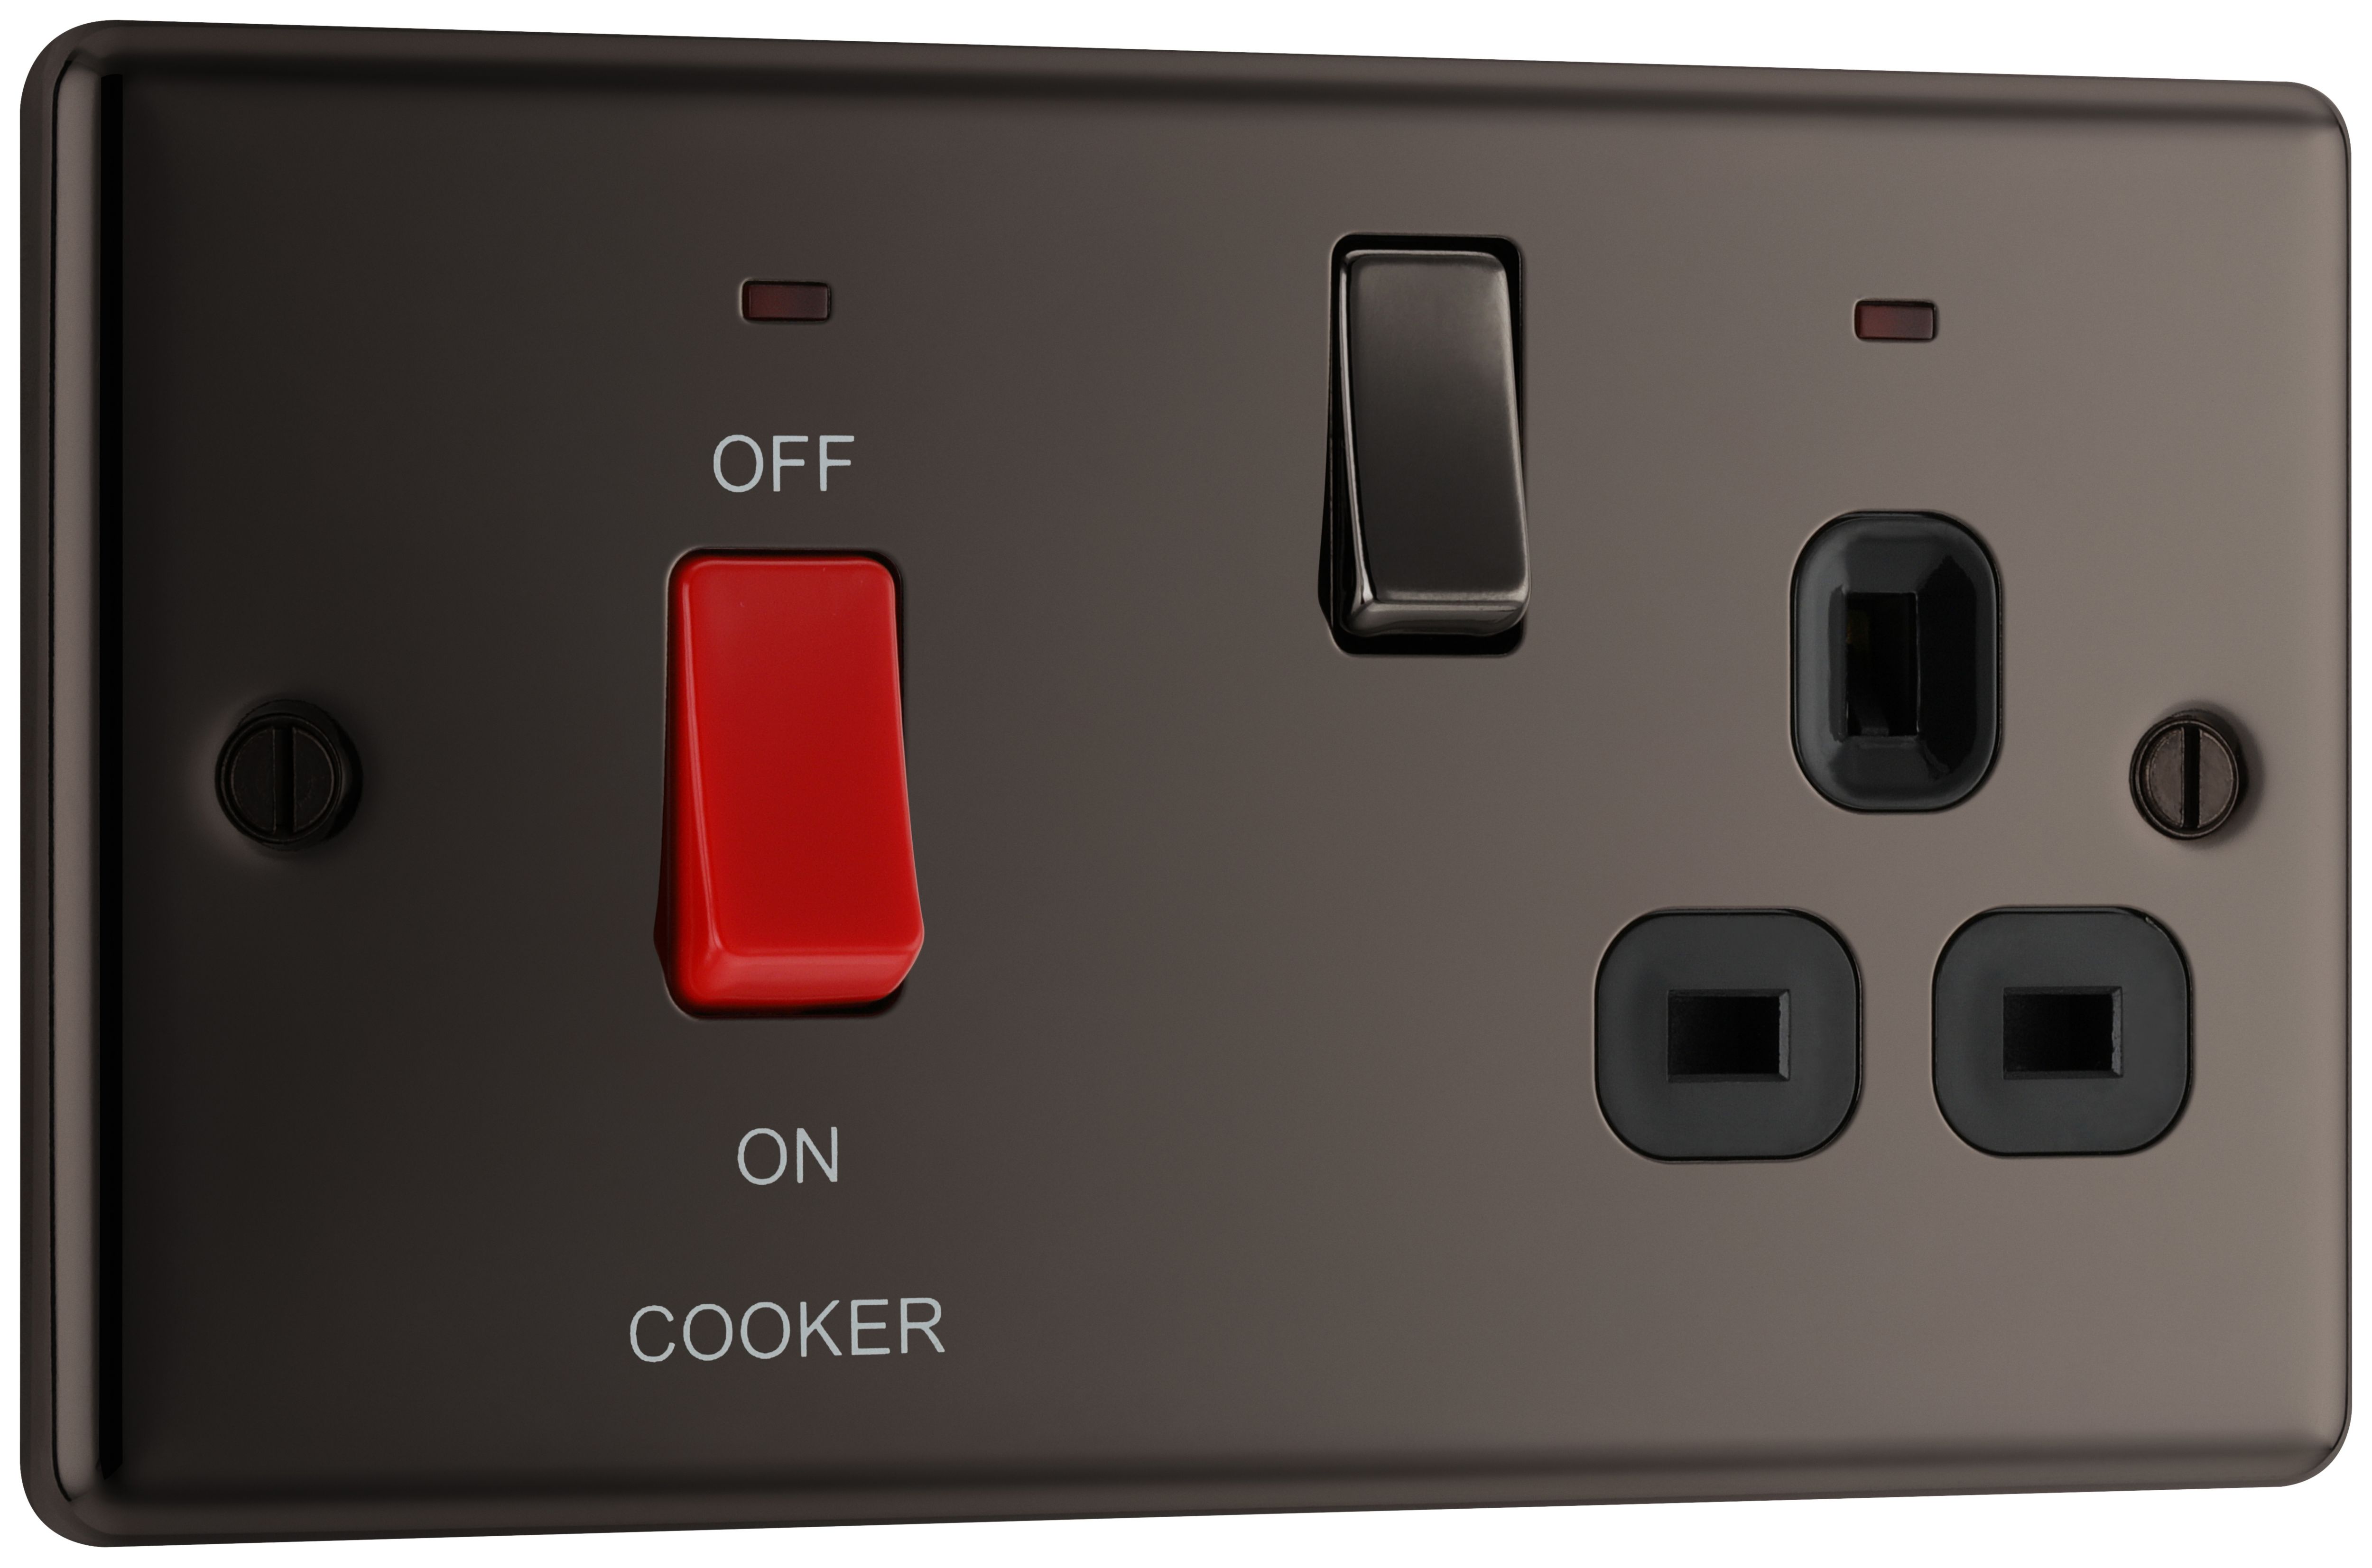 Image of BG 45 Amp Screwed Raised Plate Cooker Control Unit with Switched 13 Amp Power Socket Includes Power Indicators - Black Nickel